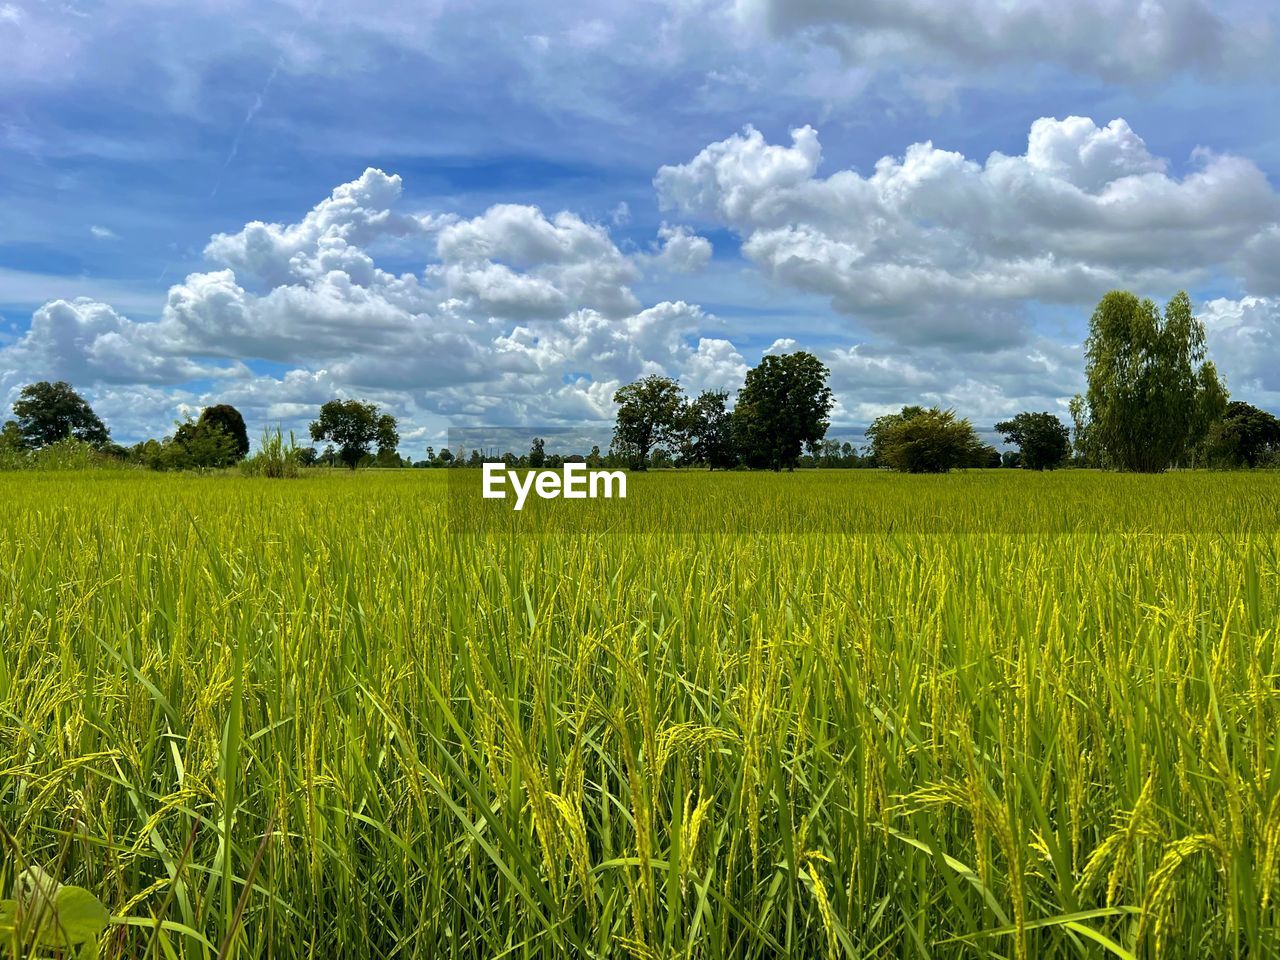 plant, landscape, field, sky, land, agriculture, cloud, environment, rural scene, grassland, crop, cereal plant, growth, meadow, nature, grass, pasture, beauty in nature, plain, scenics - nature, prairie, tree, green, farm, paddy field, food, rural area, horizon, no people, tranquility, food and drink, tranquil scene, rapeseed, day, outdoors, barley, corn, summer, idyllic, freshness, blue, non-urban scene